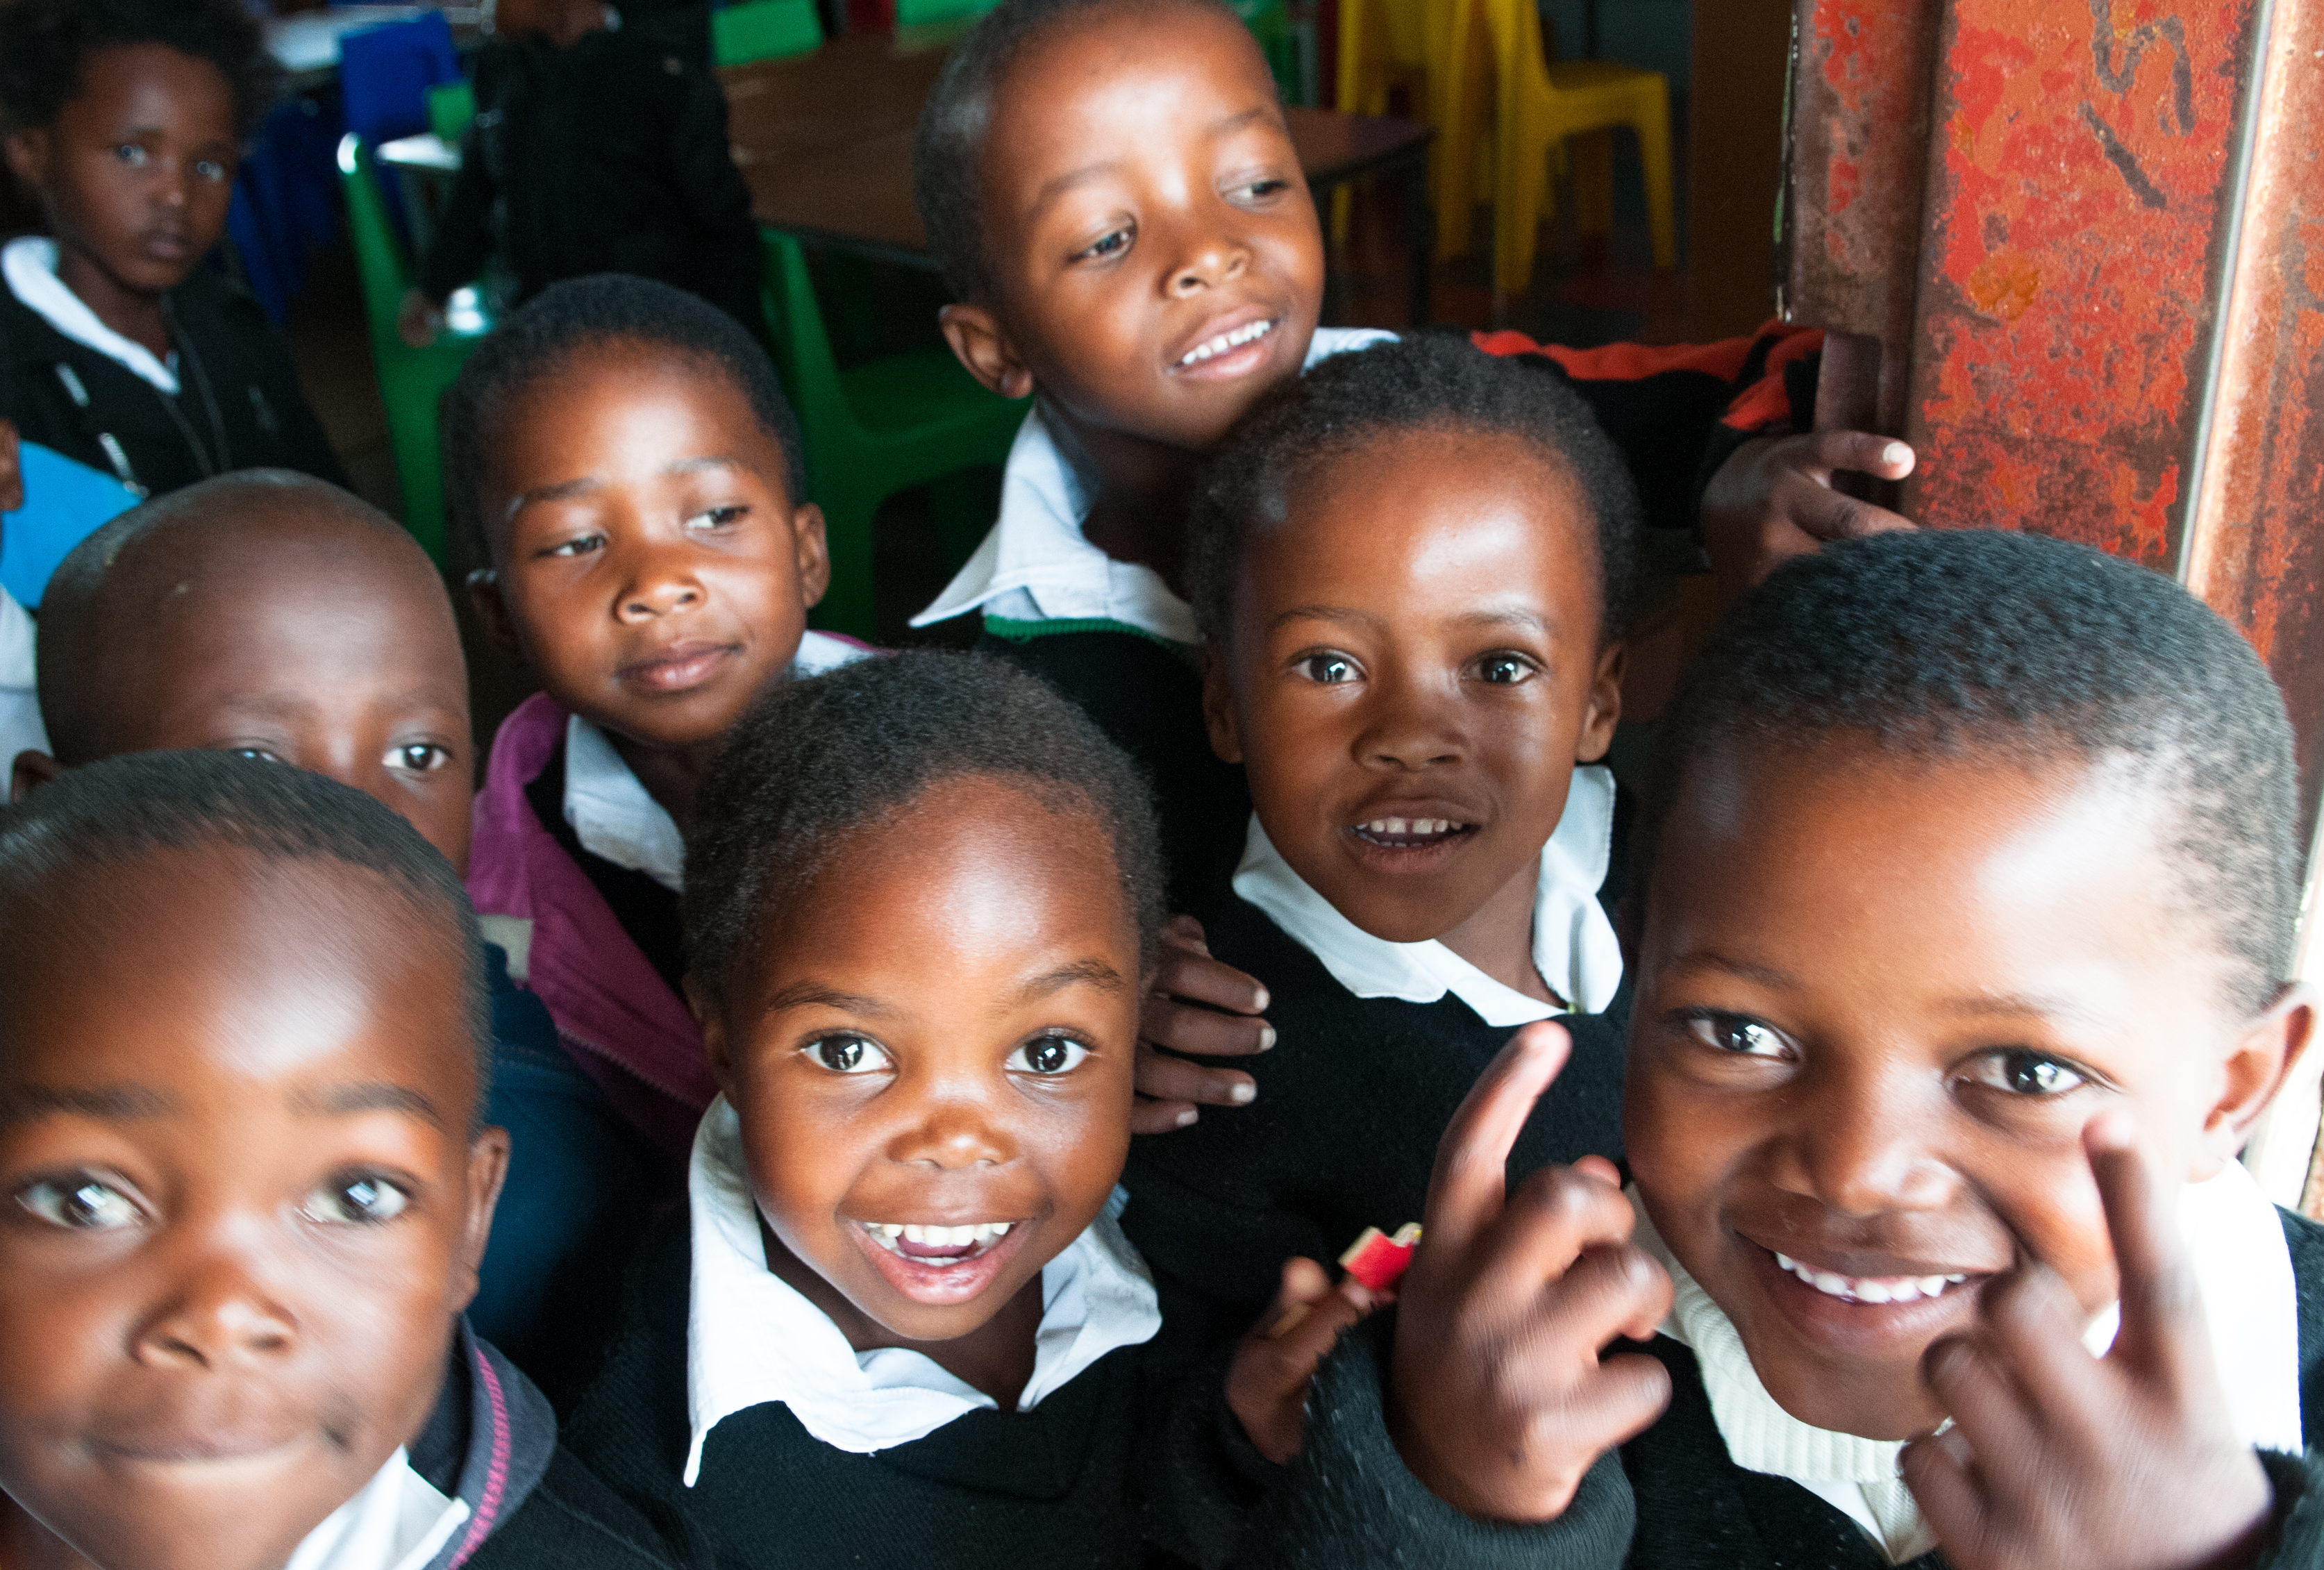 Zenande, 5 years old (in the middle), and her classmates have just finished a grade 0 class in the Gwebinkunda Primary School situated in the rural part of Eastern Cape, South Africa